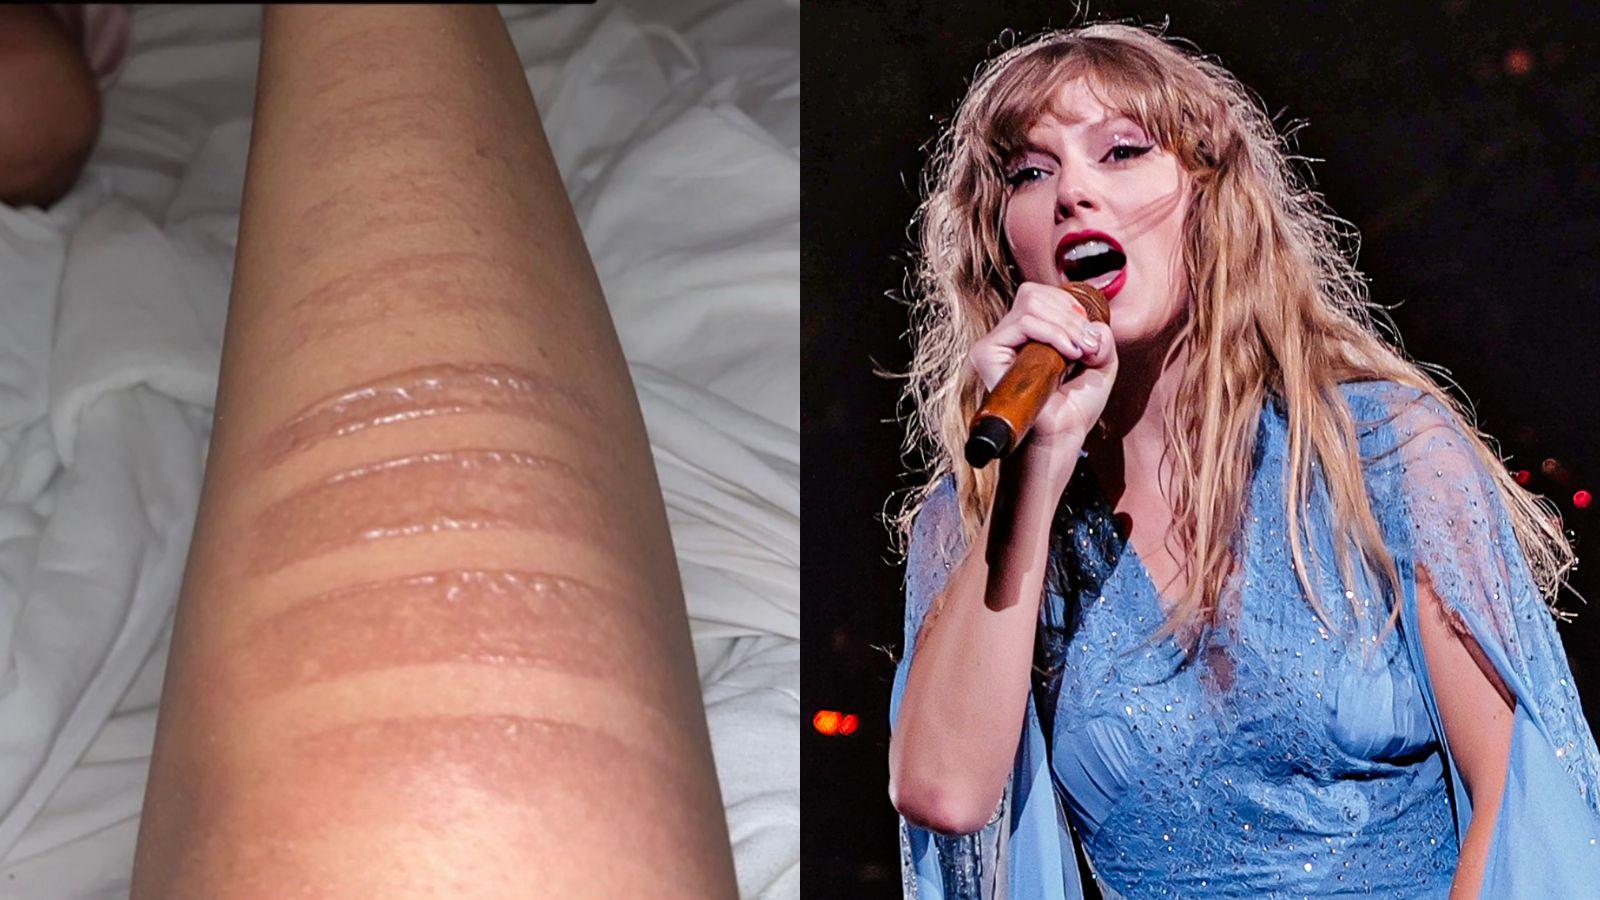 Taylor Swift fan suffered burns during concert